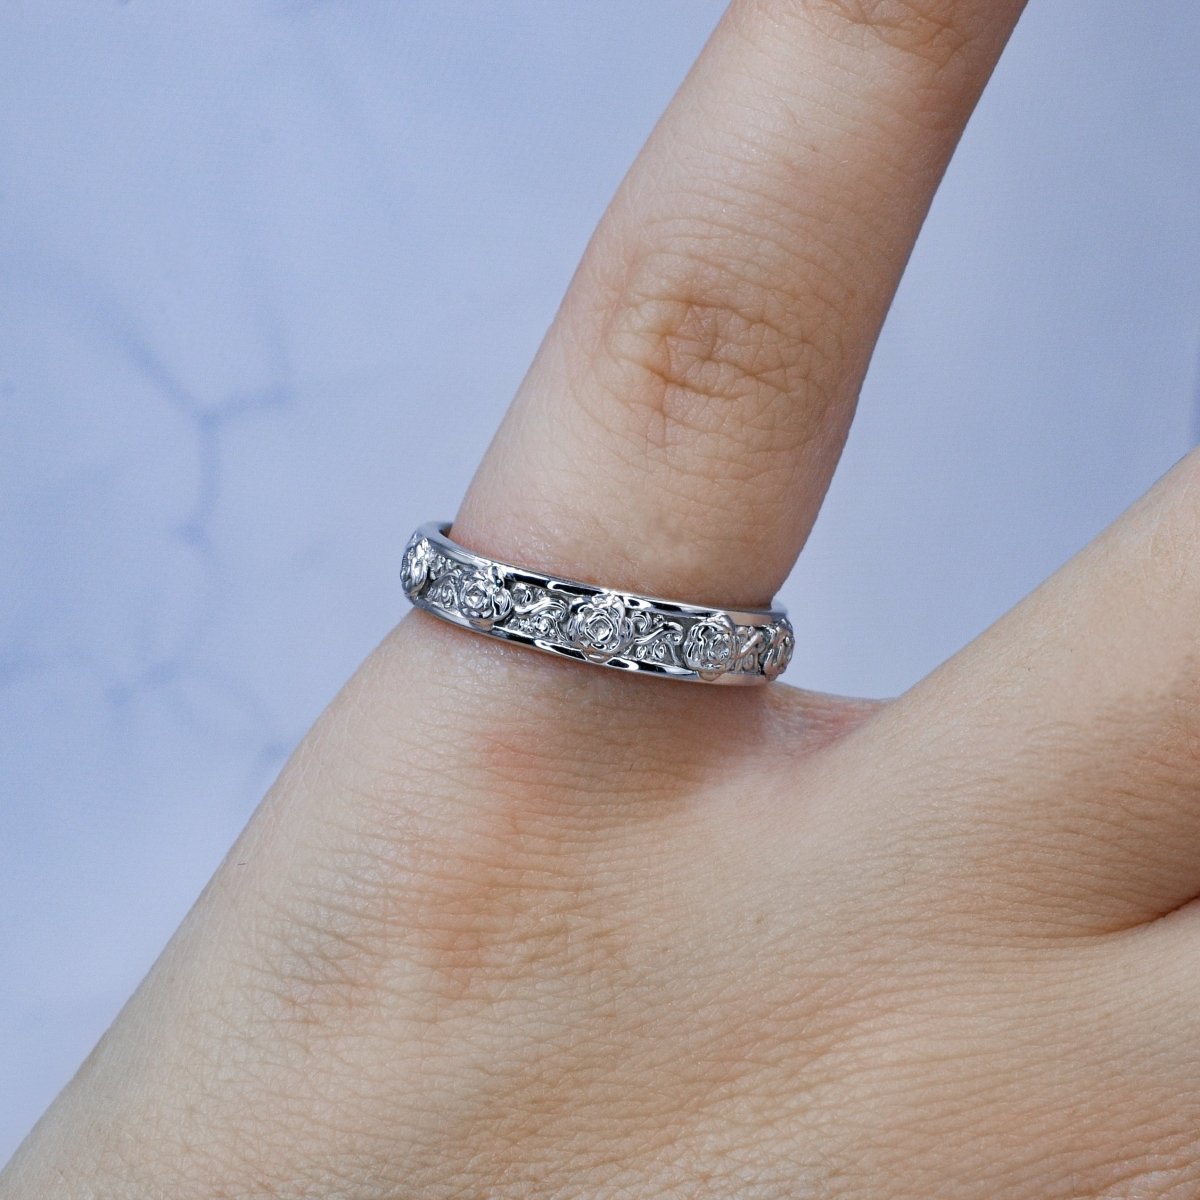 Special Plain Wedding Ring in 14KT White Gold - Primestyle.com